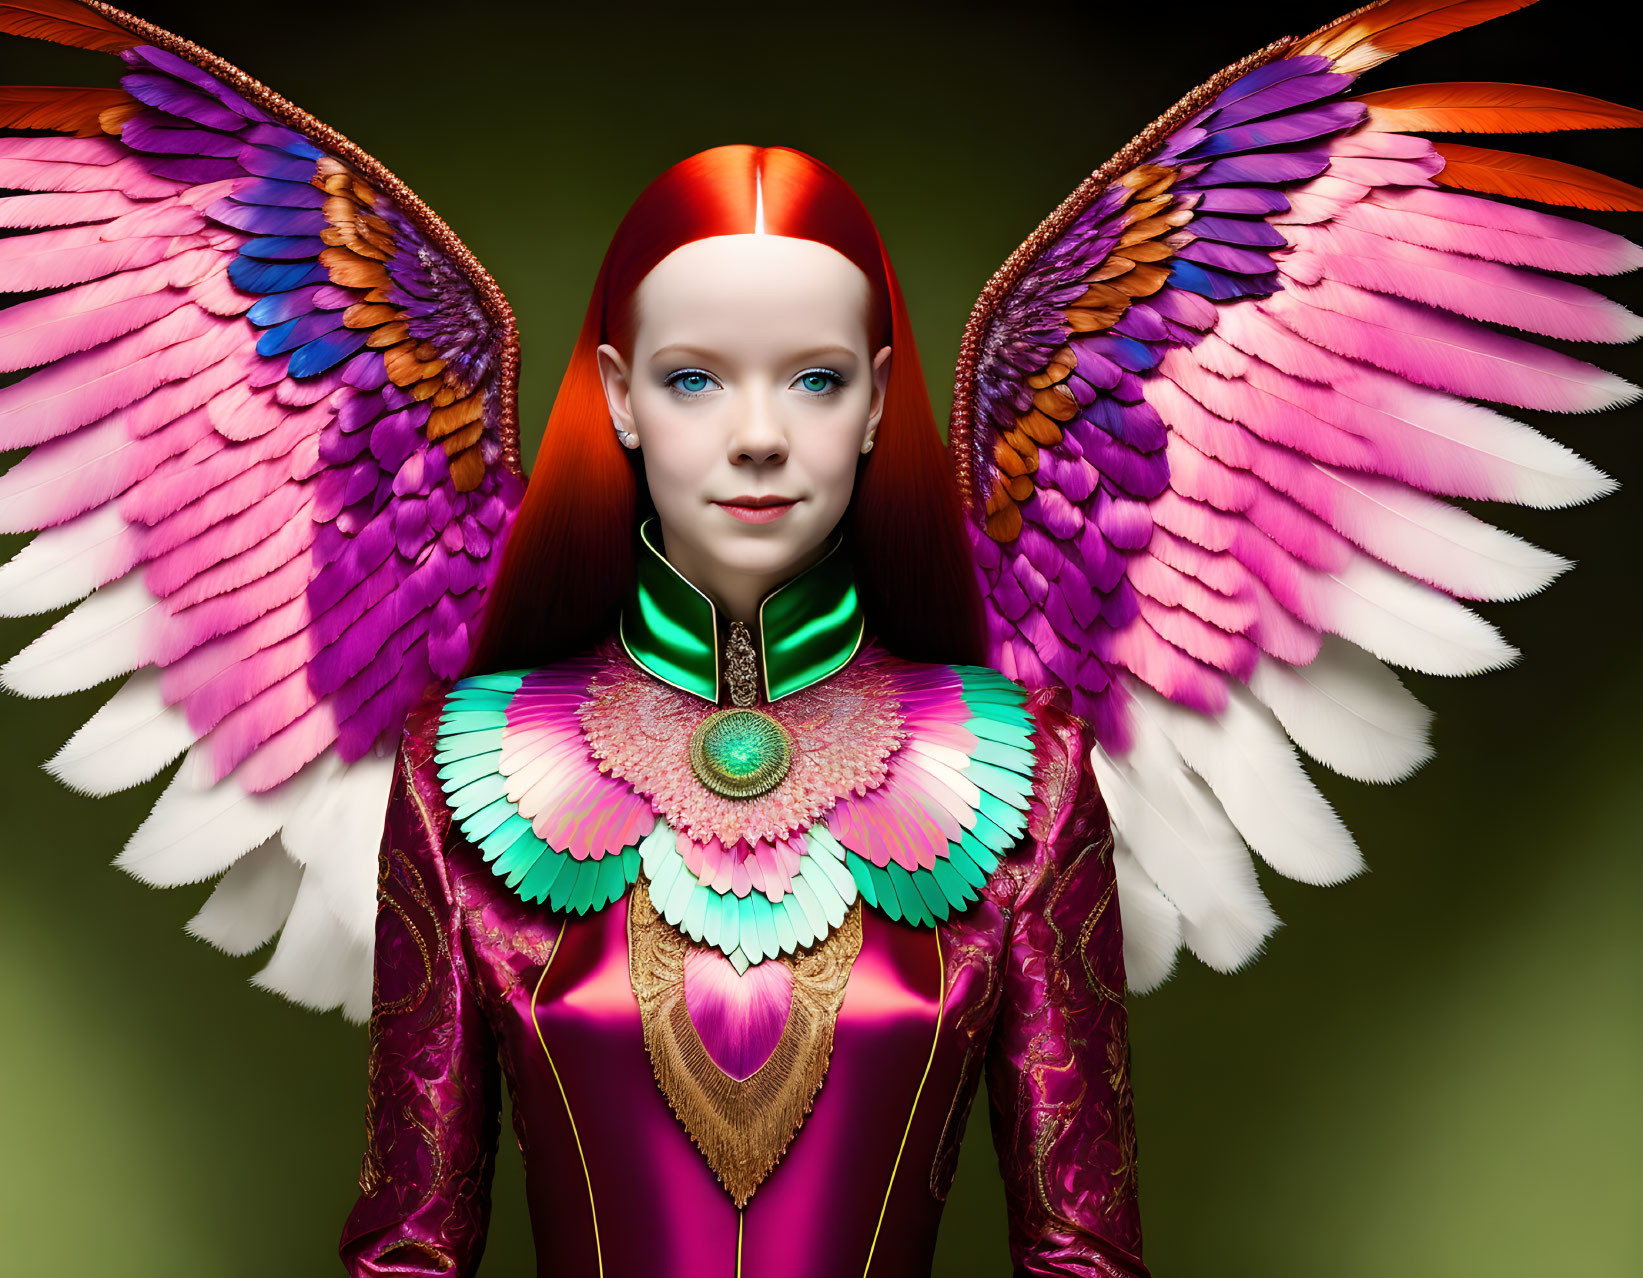 Digital art: Woman with multicolored wings and metallic costume